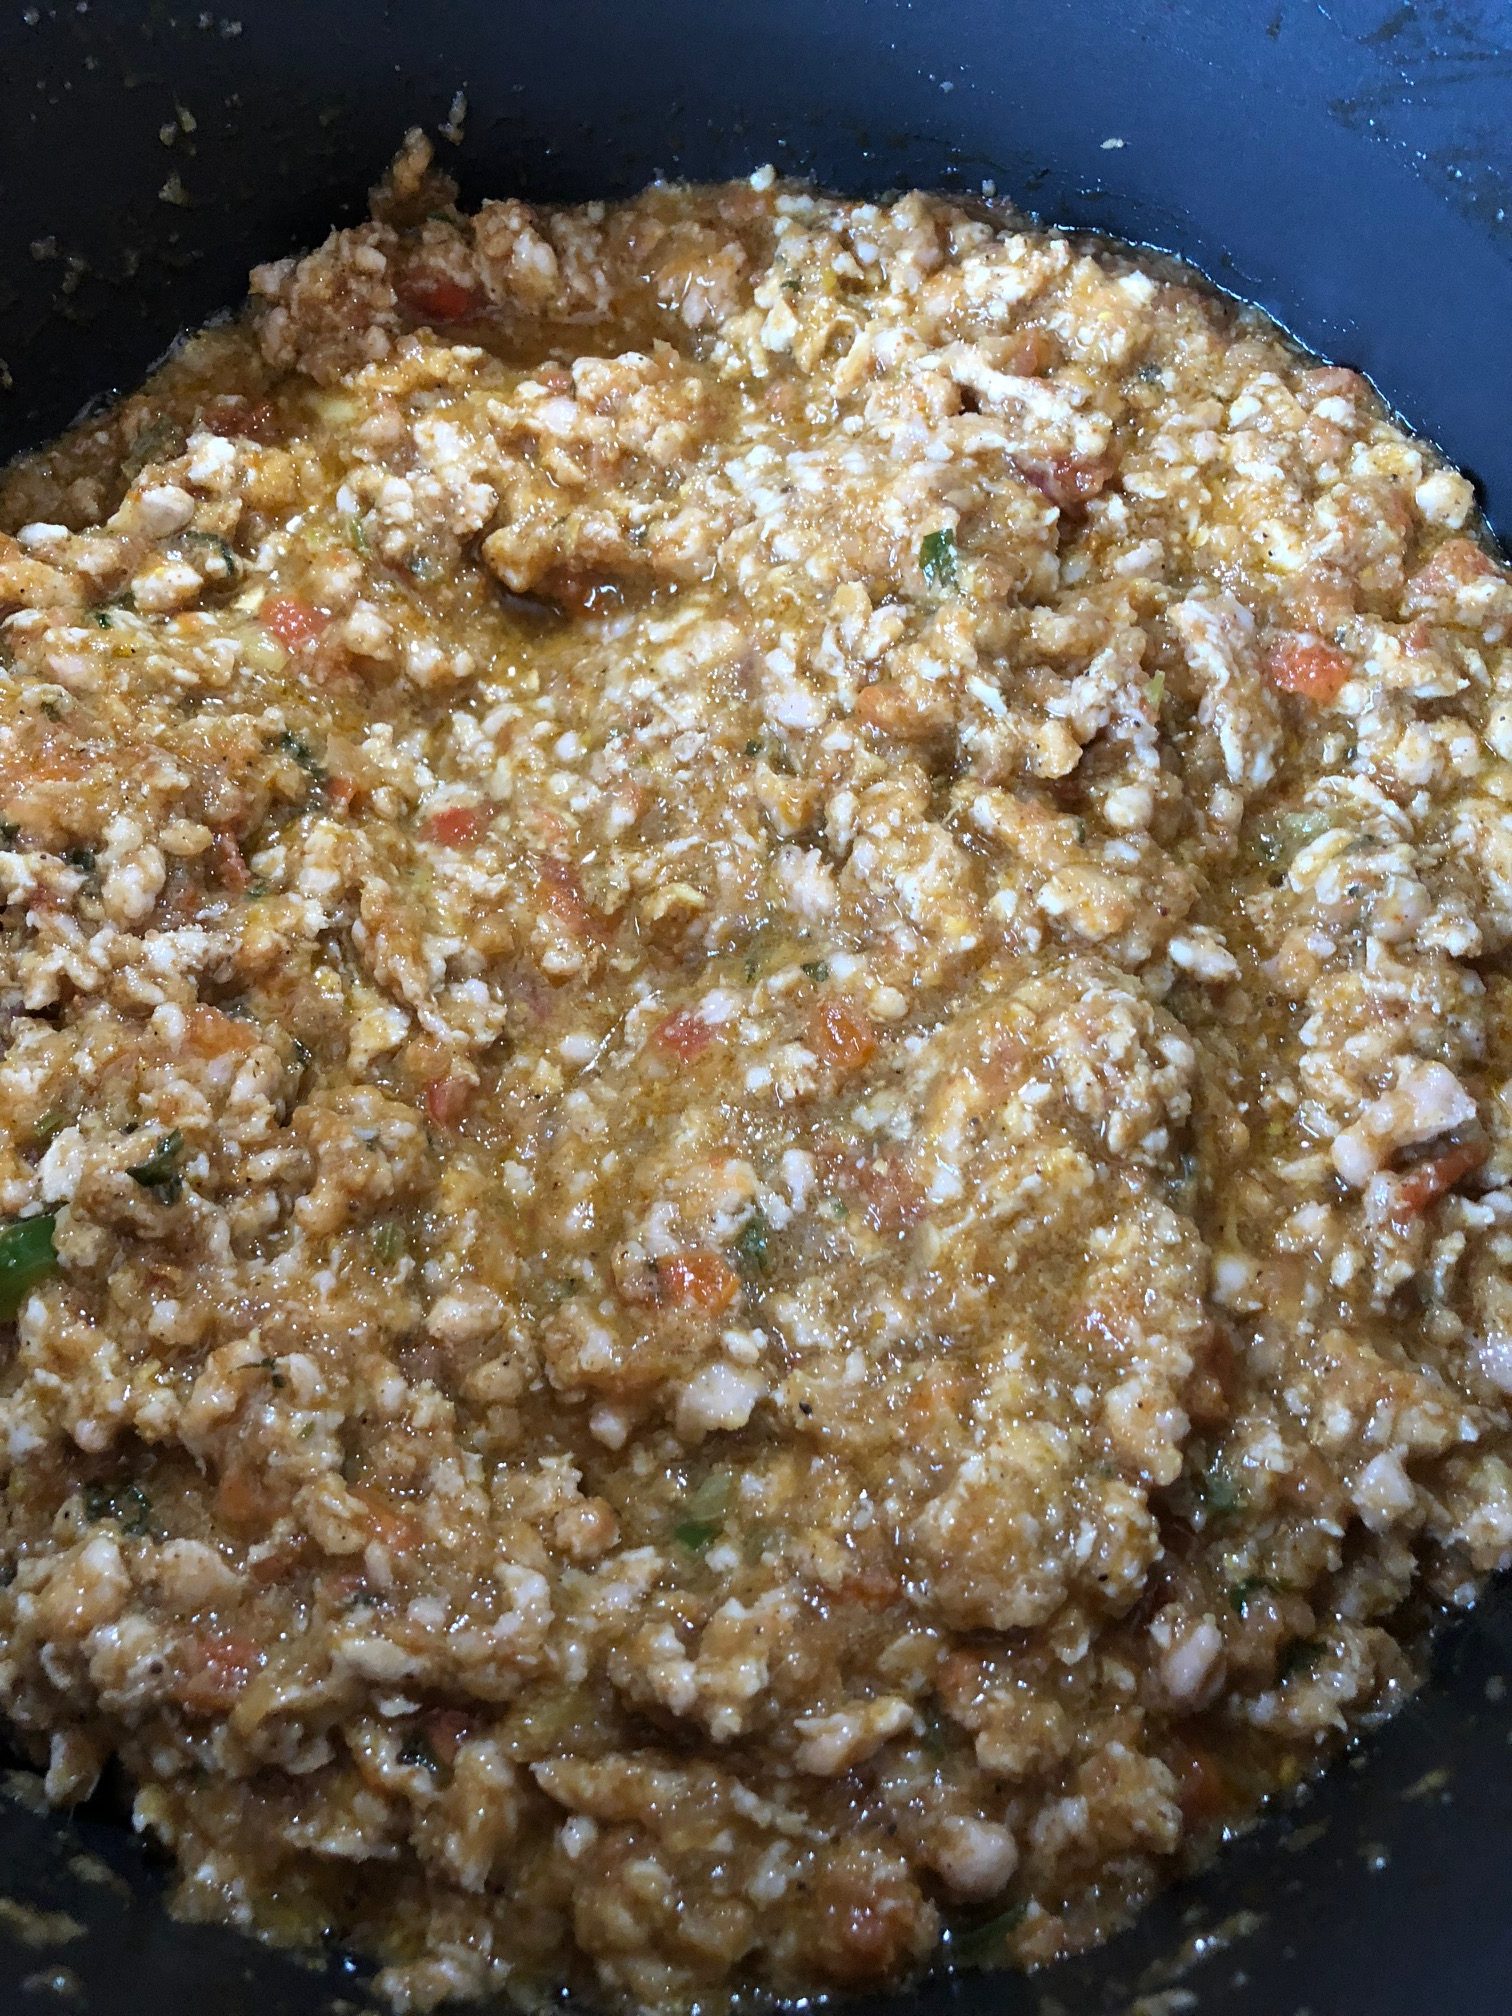 ground chicken being cooked with spices